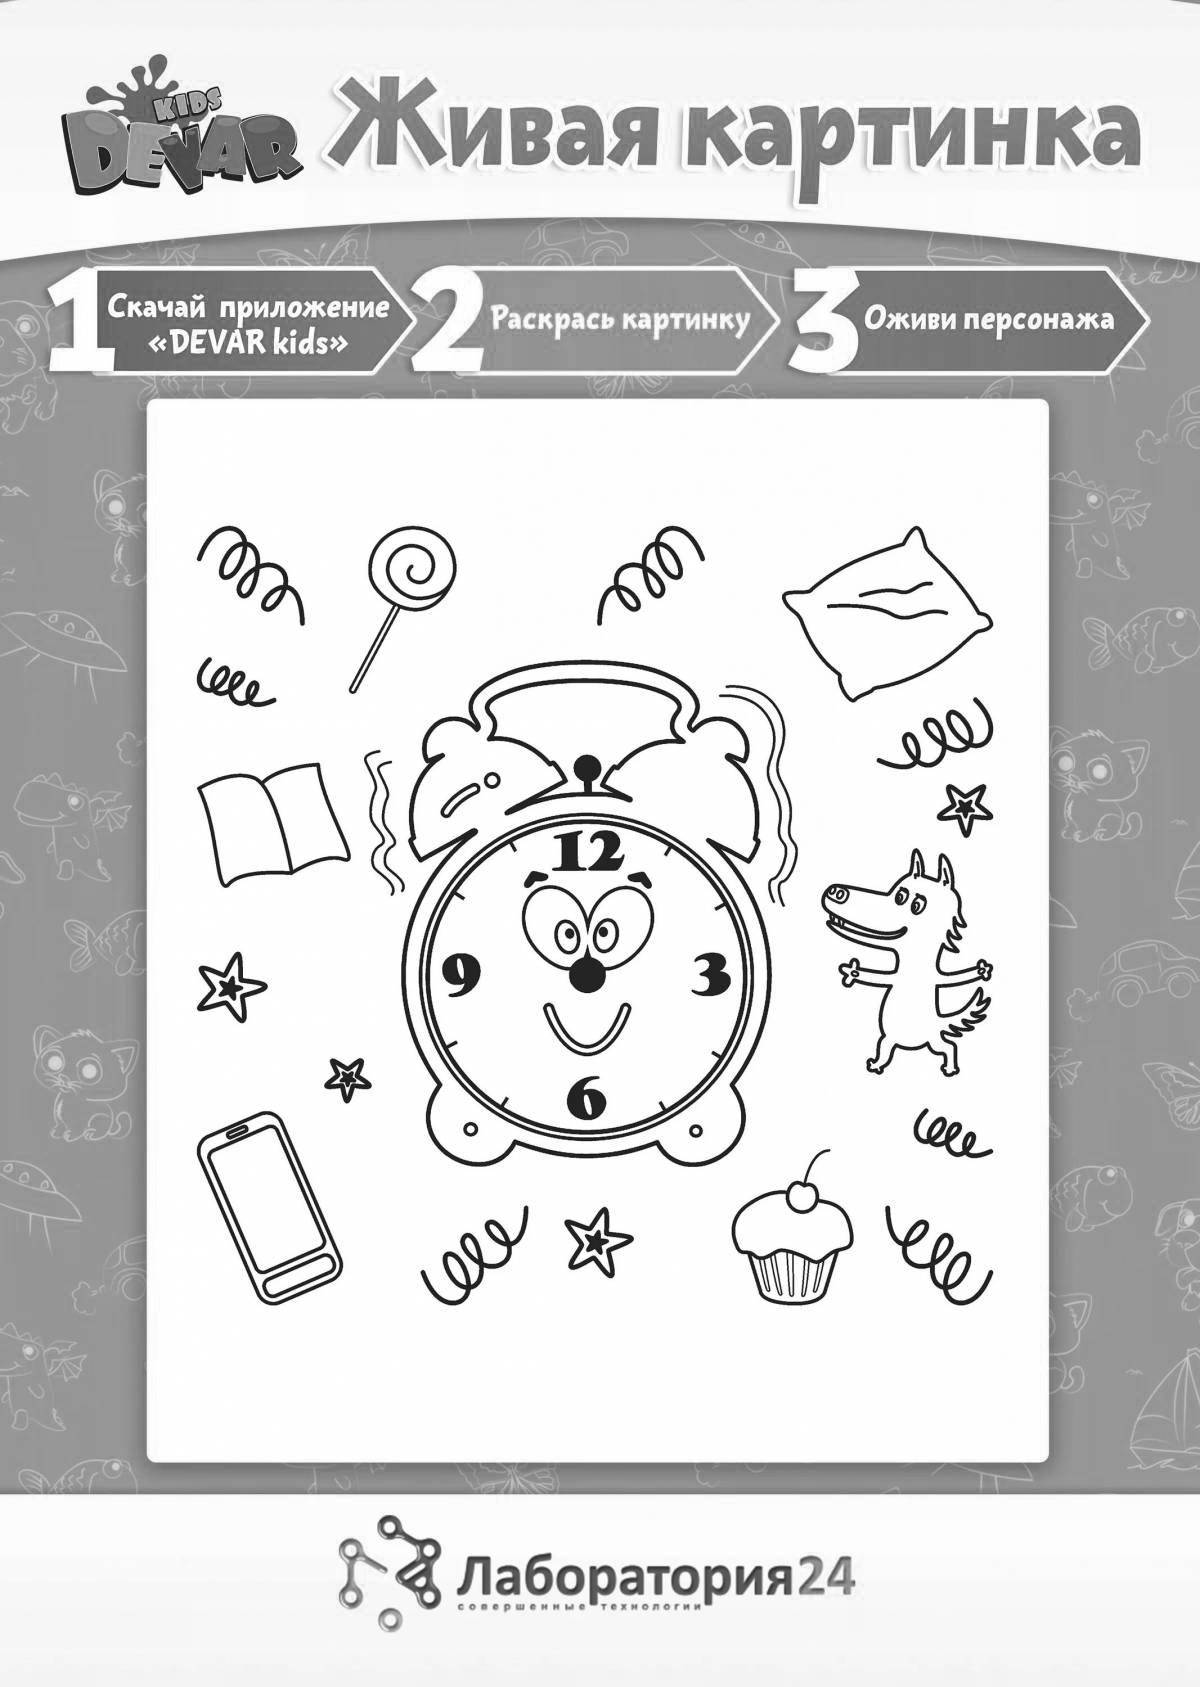 Splendid coloring page live application